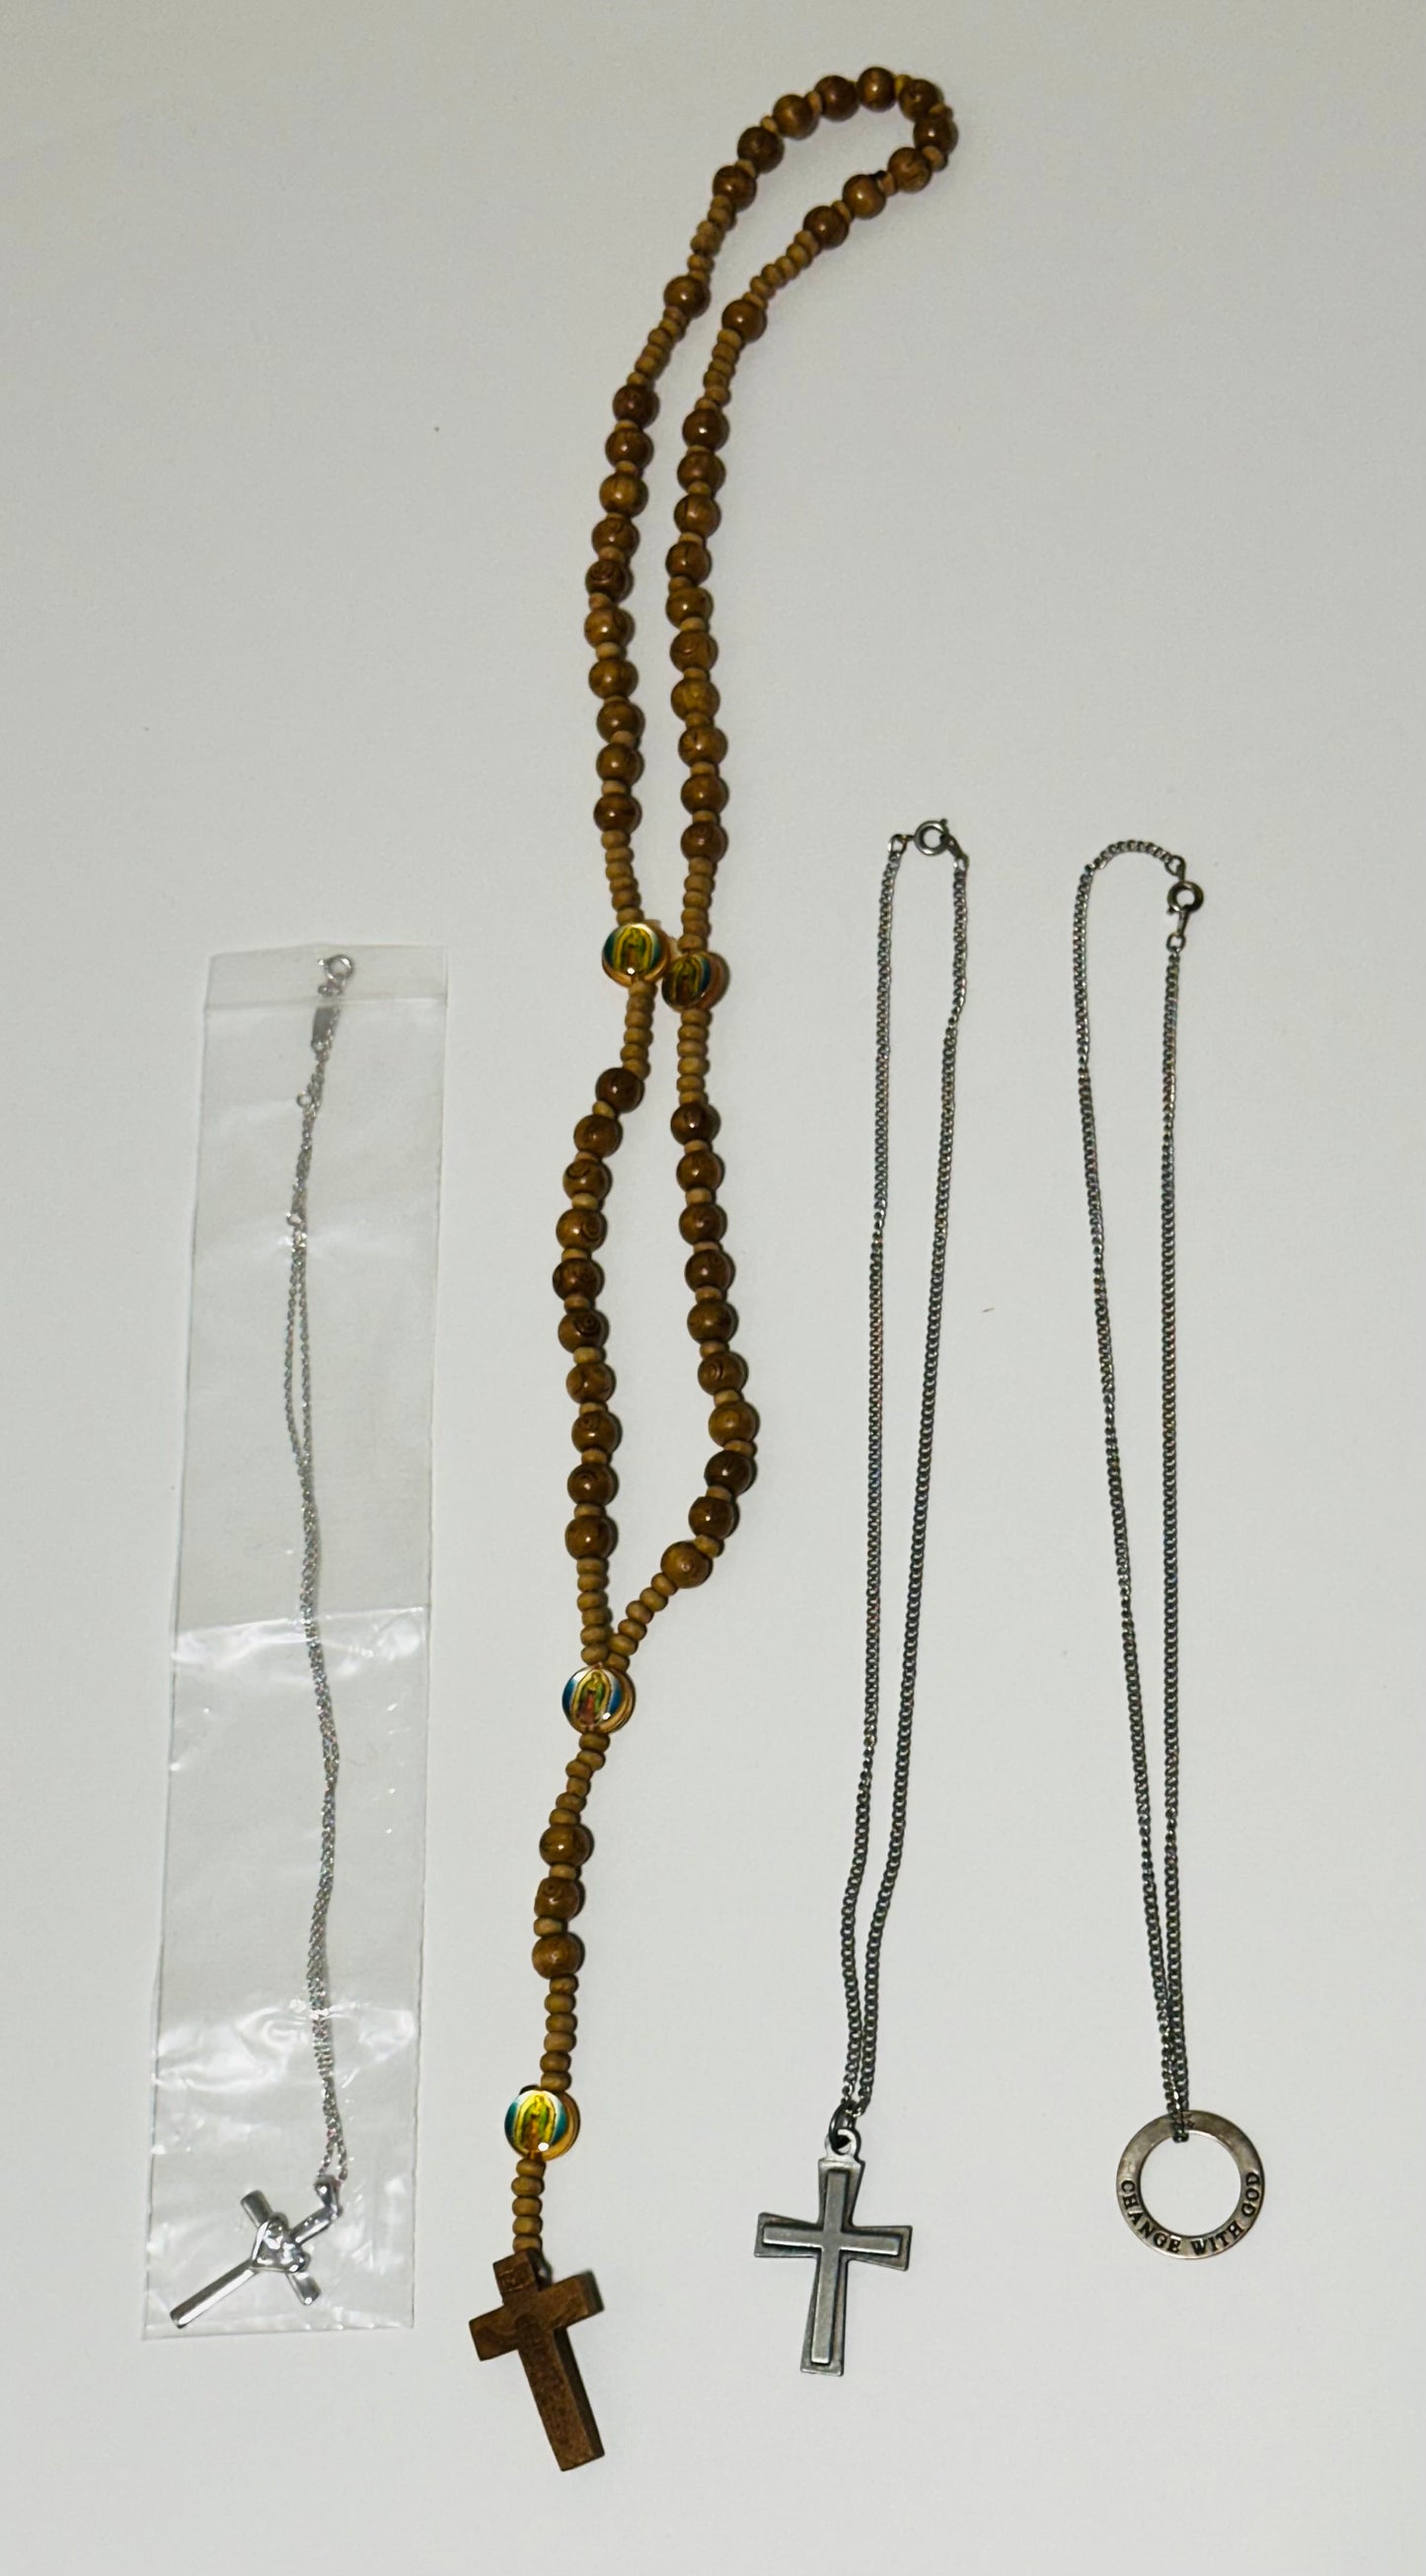 2 Cross Necklaces, 1 Wooden Rosary, 1 Necklace 'Change with God'